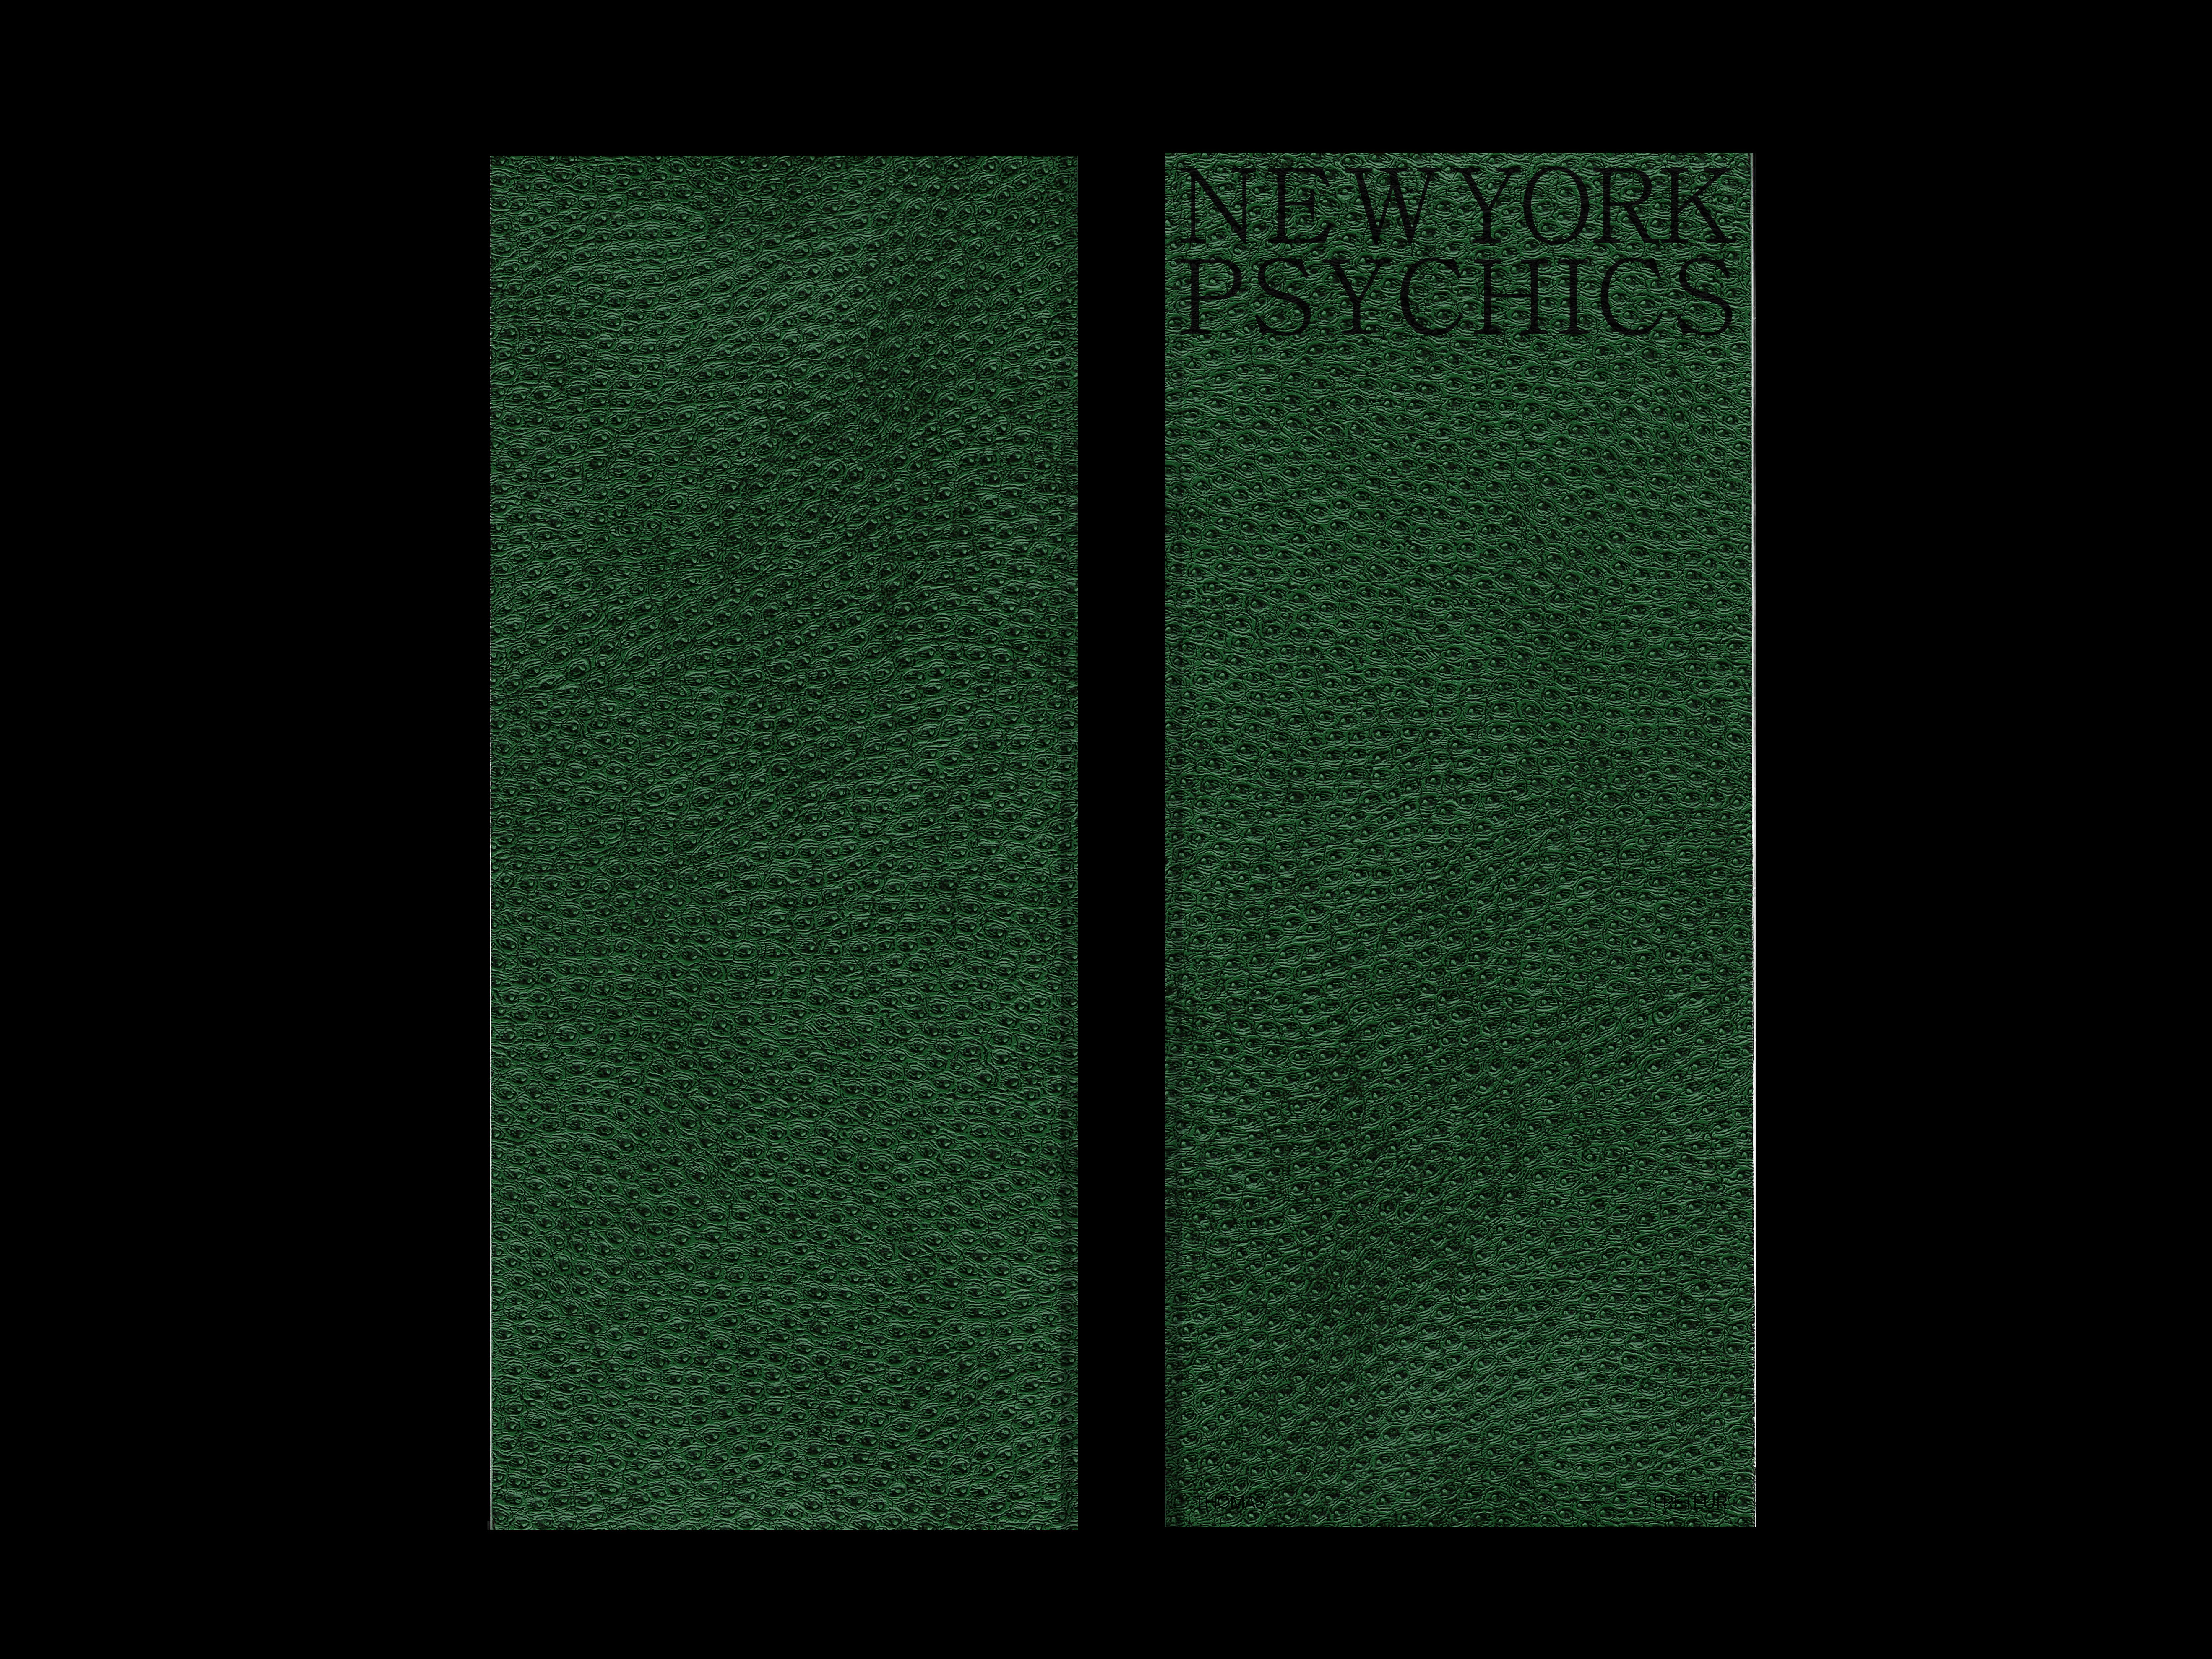 https://julienbaiamonte.com/content/1-projects/new-york-psychics/nyc_psychics_scan002_baiamonte_251019.png.png